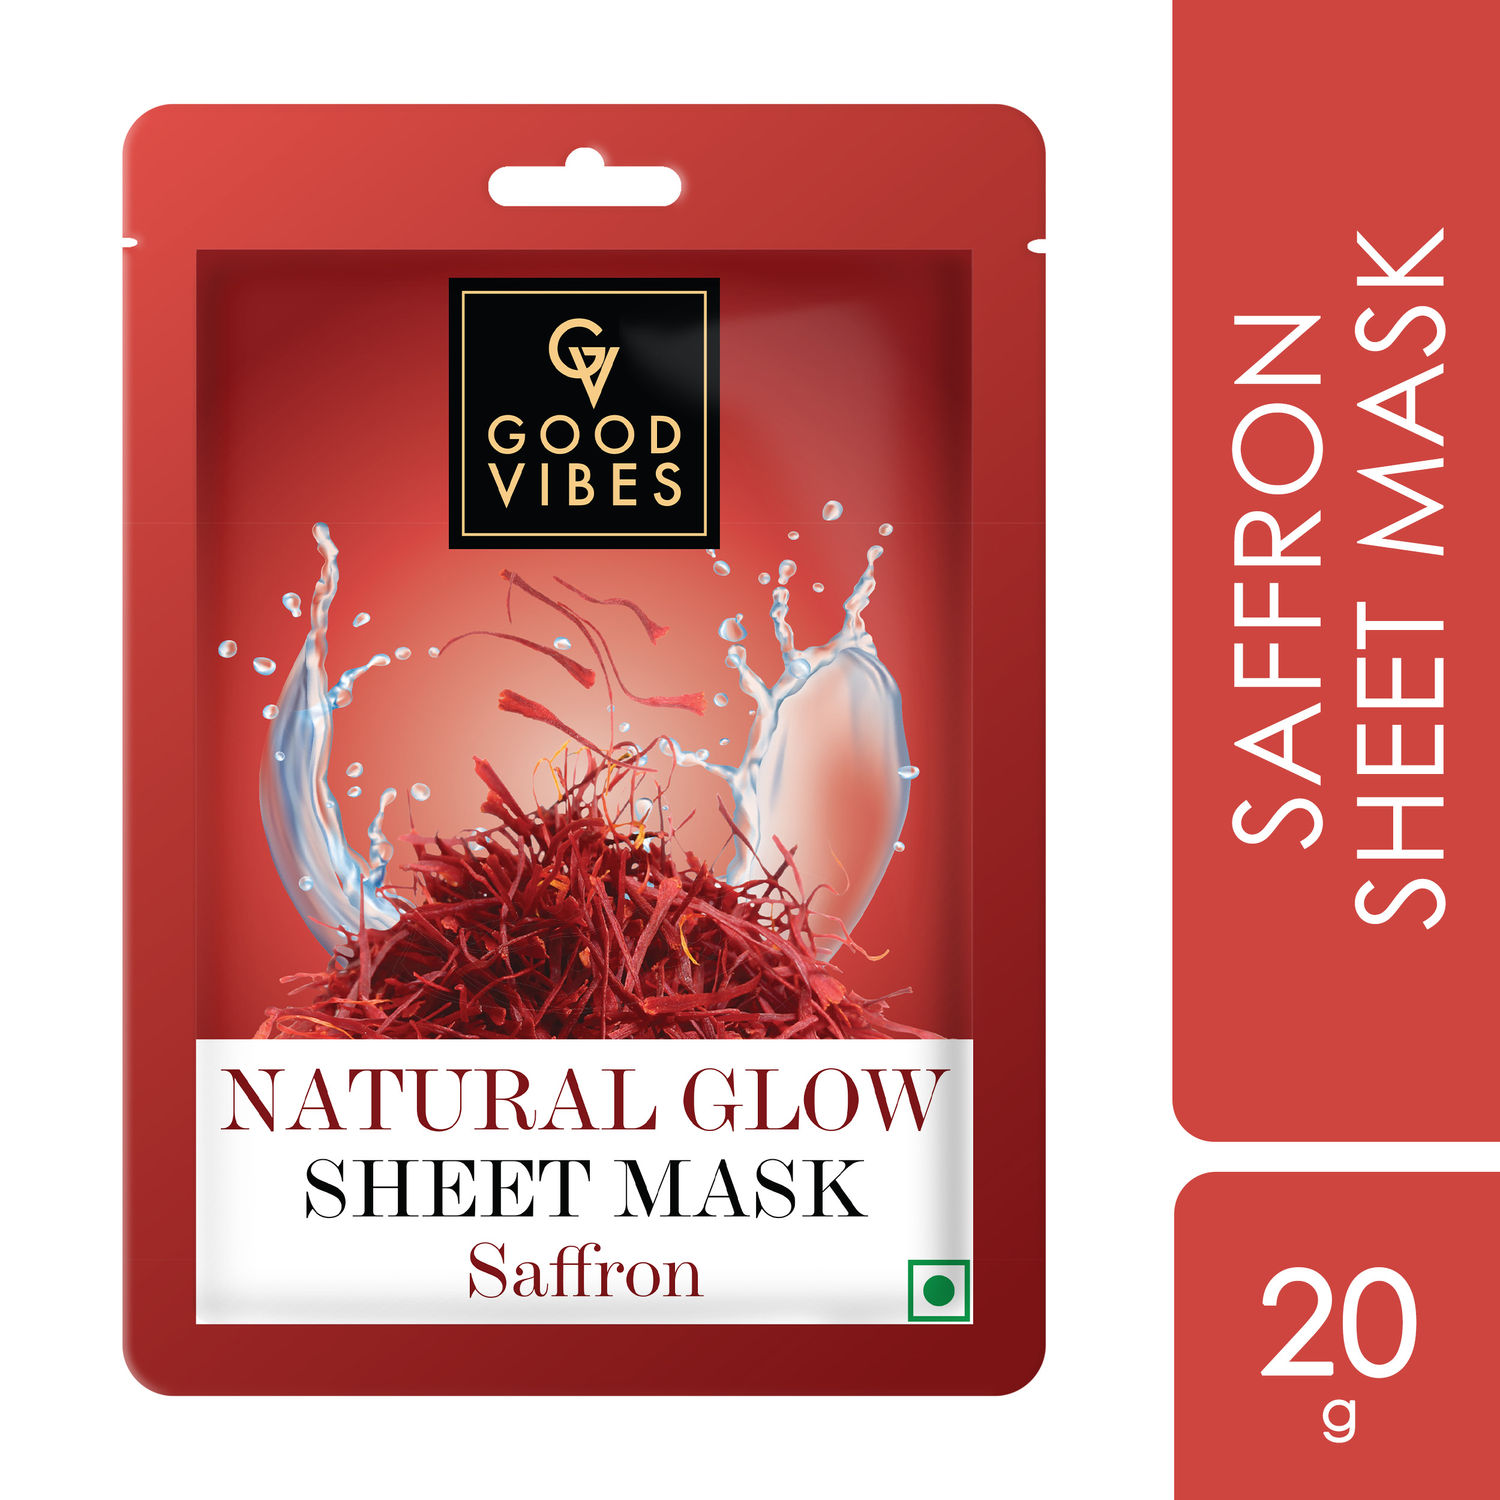 Buy Good Vibes Saffron Natural Glow Sheet Mask | For Glowing & Smooth Skin | Fights Signs Of Ageing, Treats Rough & Dull Skin (20 g) - Purplle